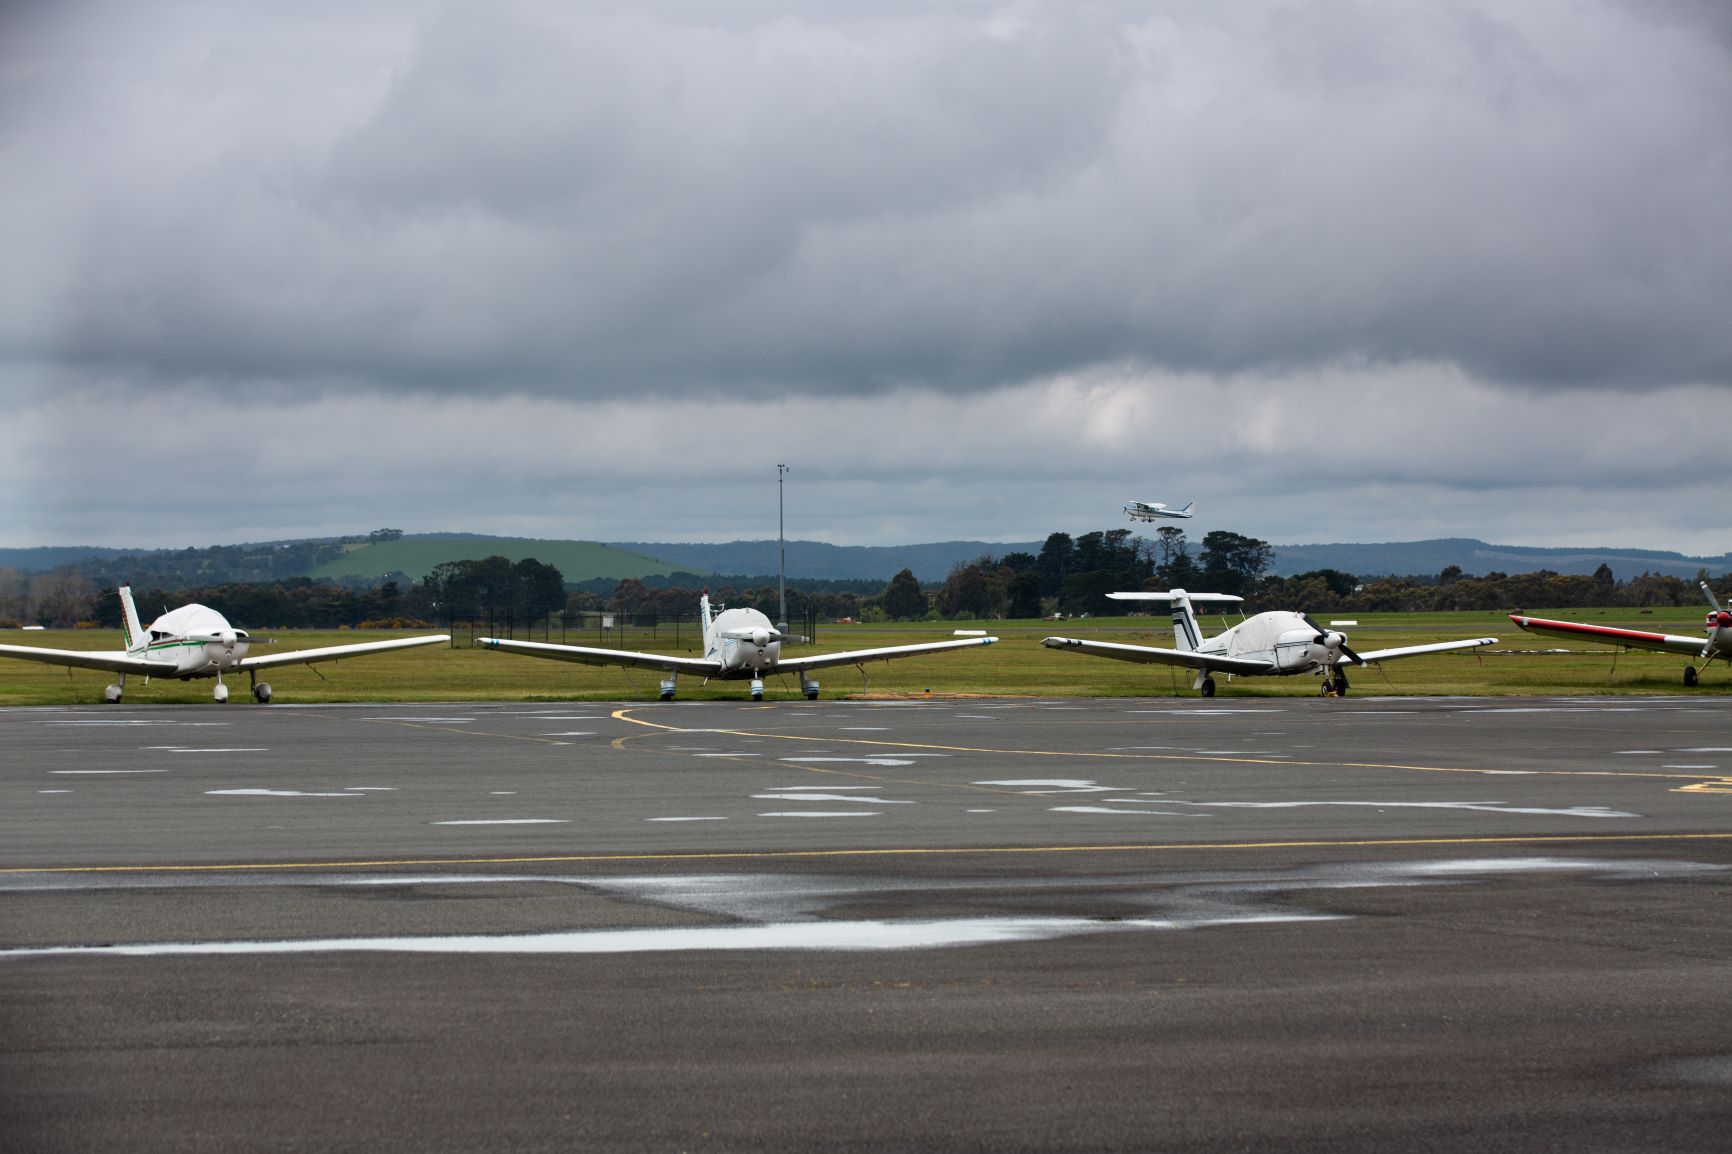 Planes on the tarmac and one taking off at Ballarat Airport 